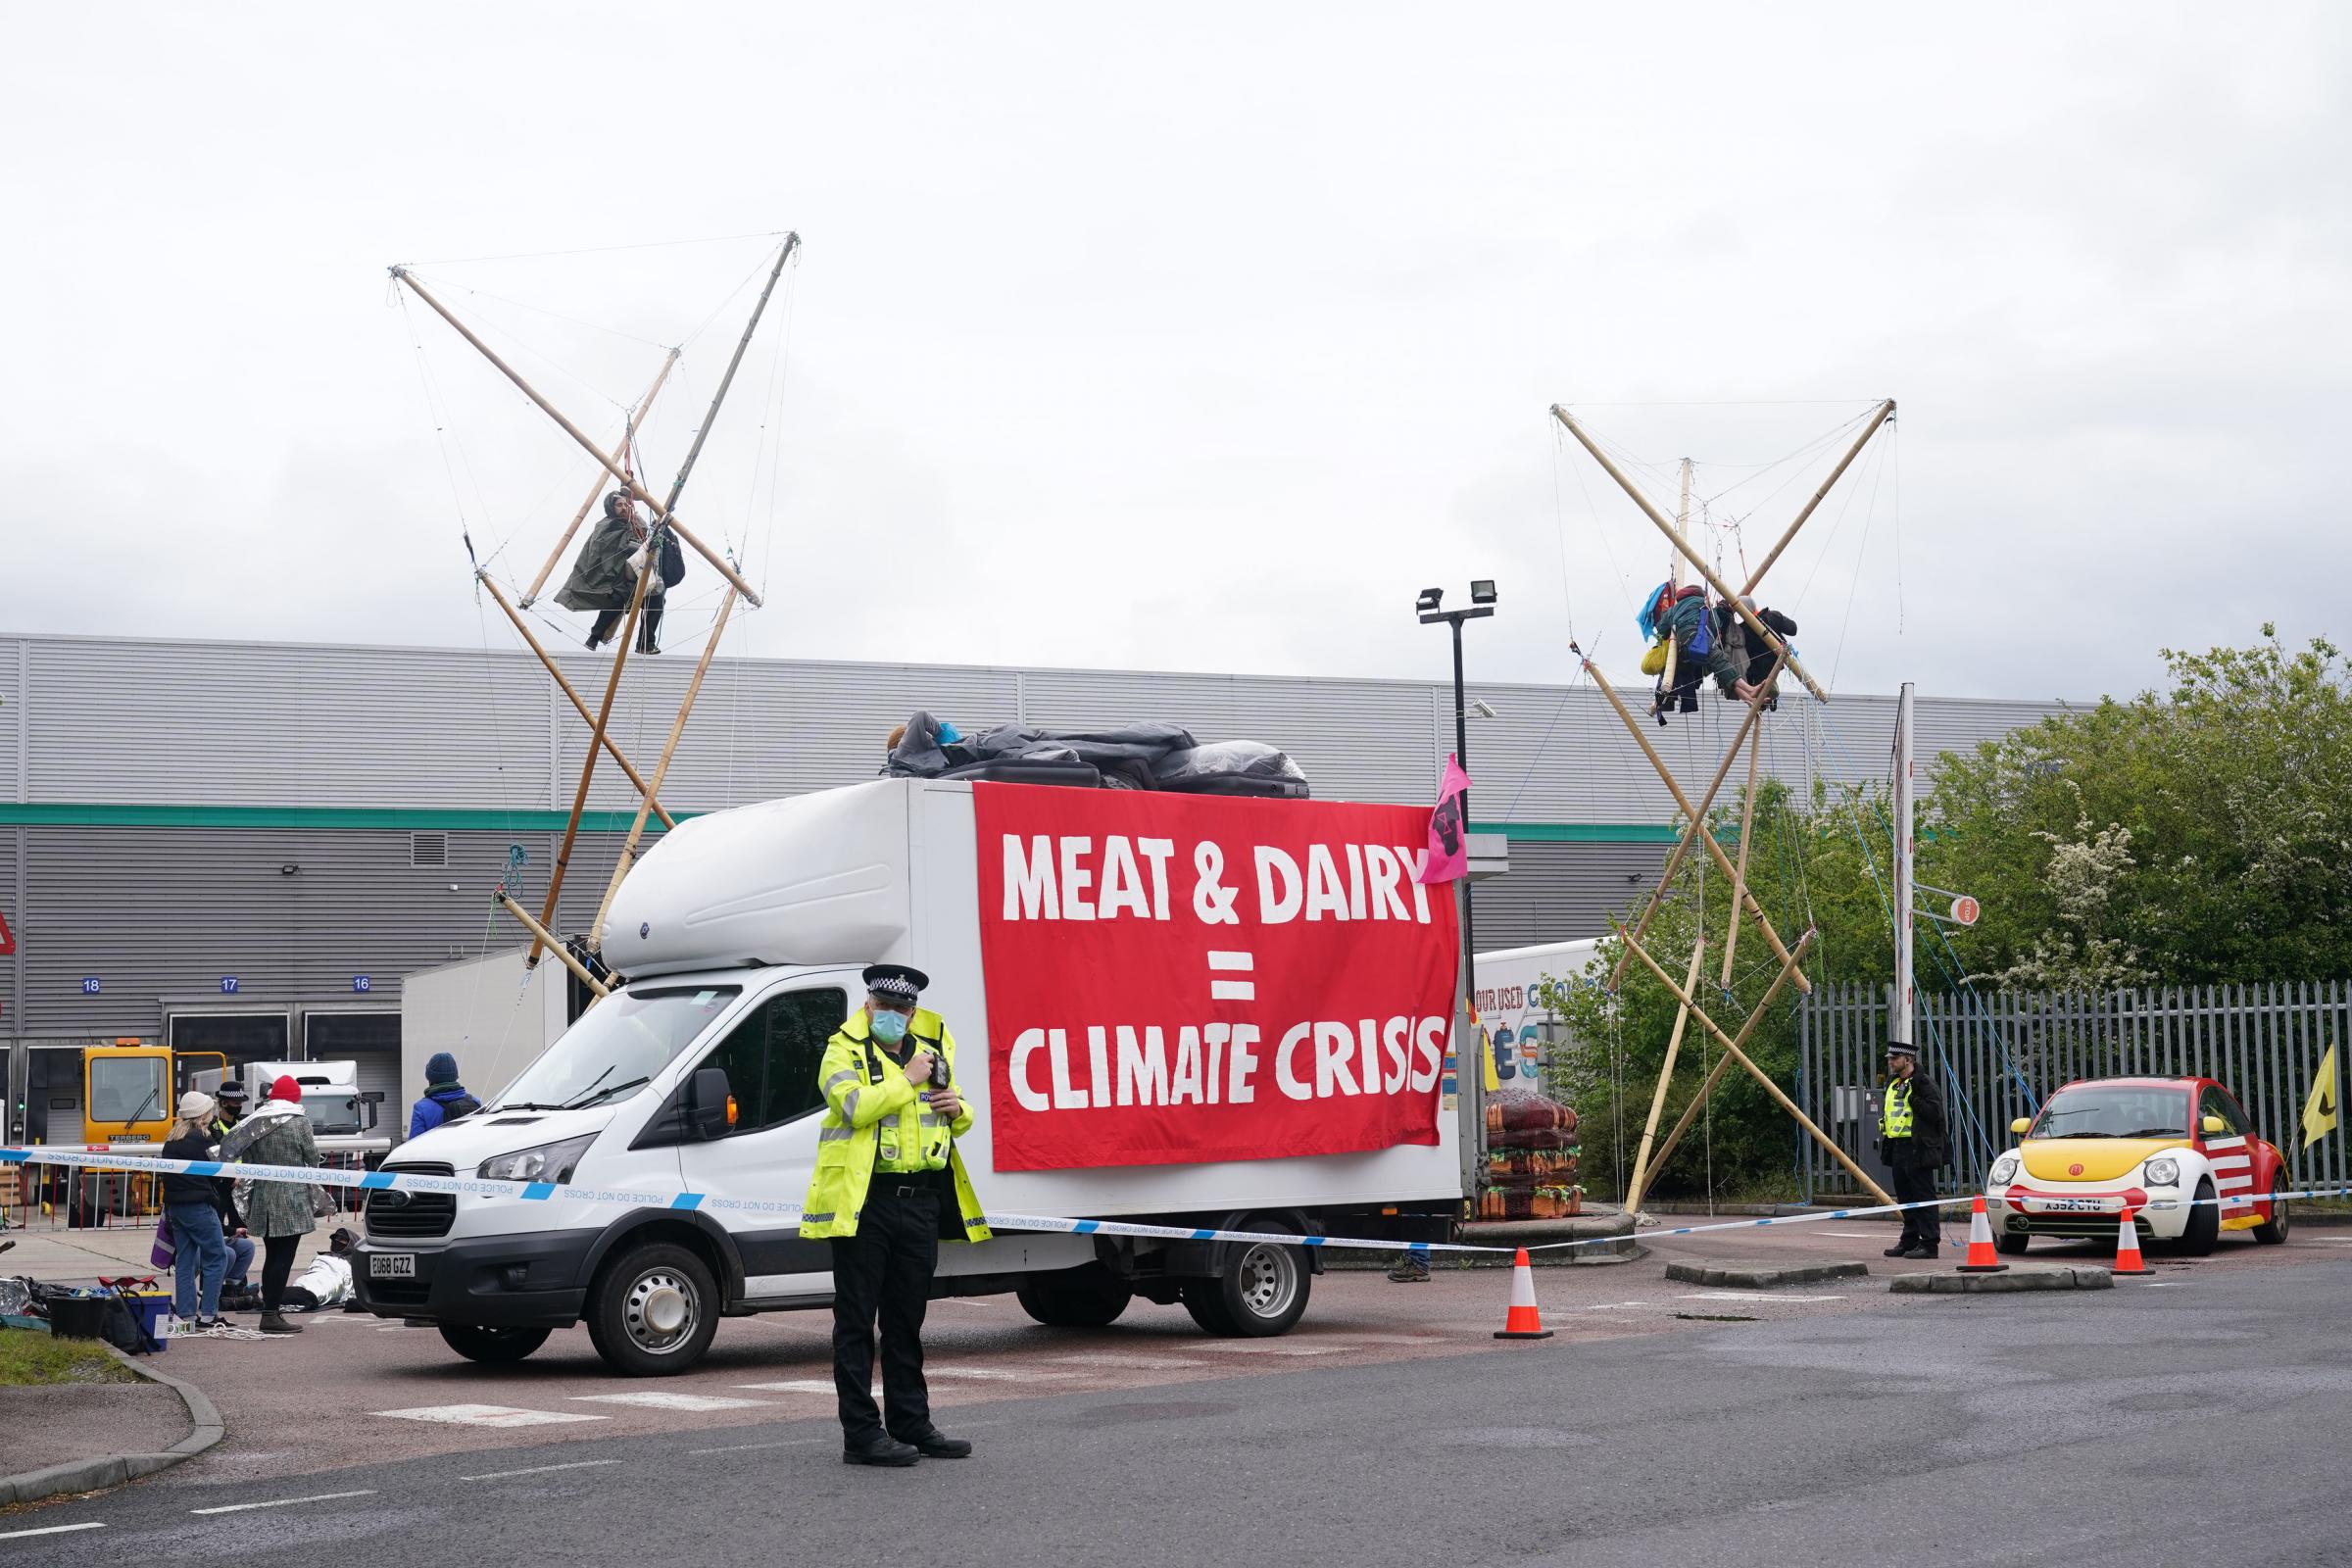 Animal Rebellion protesters suspended from a bamboo structure and on top of a van, being monitored by police officers outside a McDonalds distribution site in Hemel Hempstead, Hertfordshire, which is being blockaded to stop lorries from leaving the